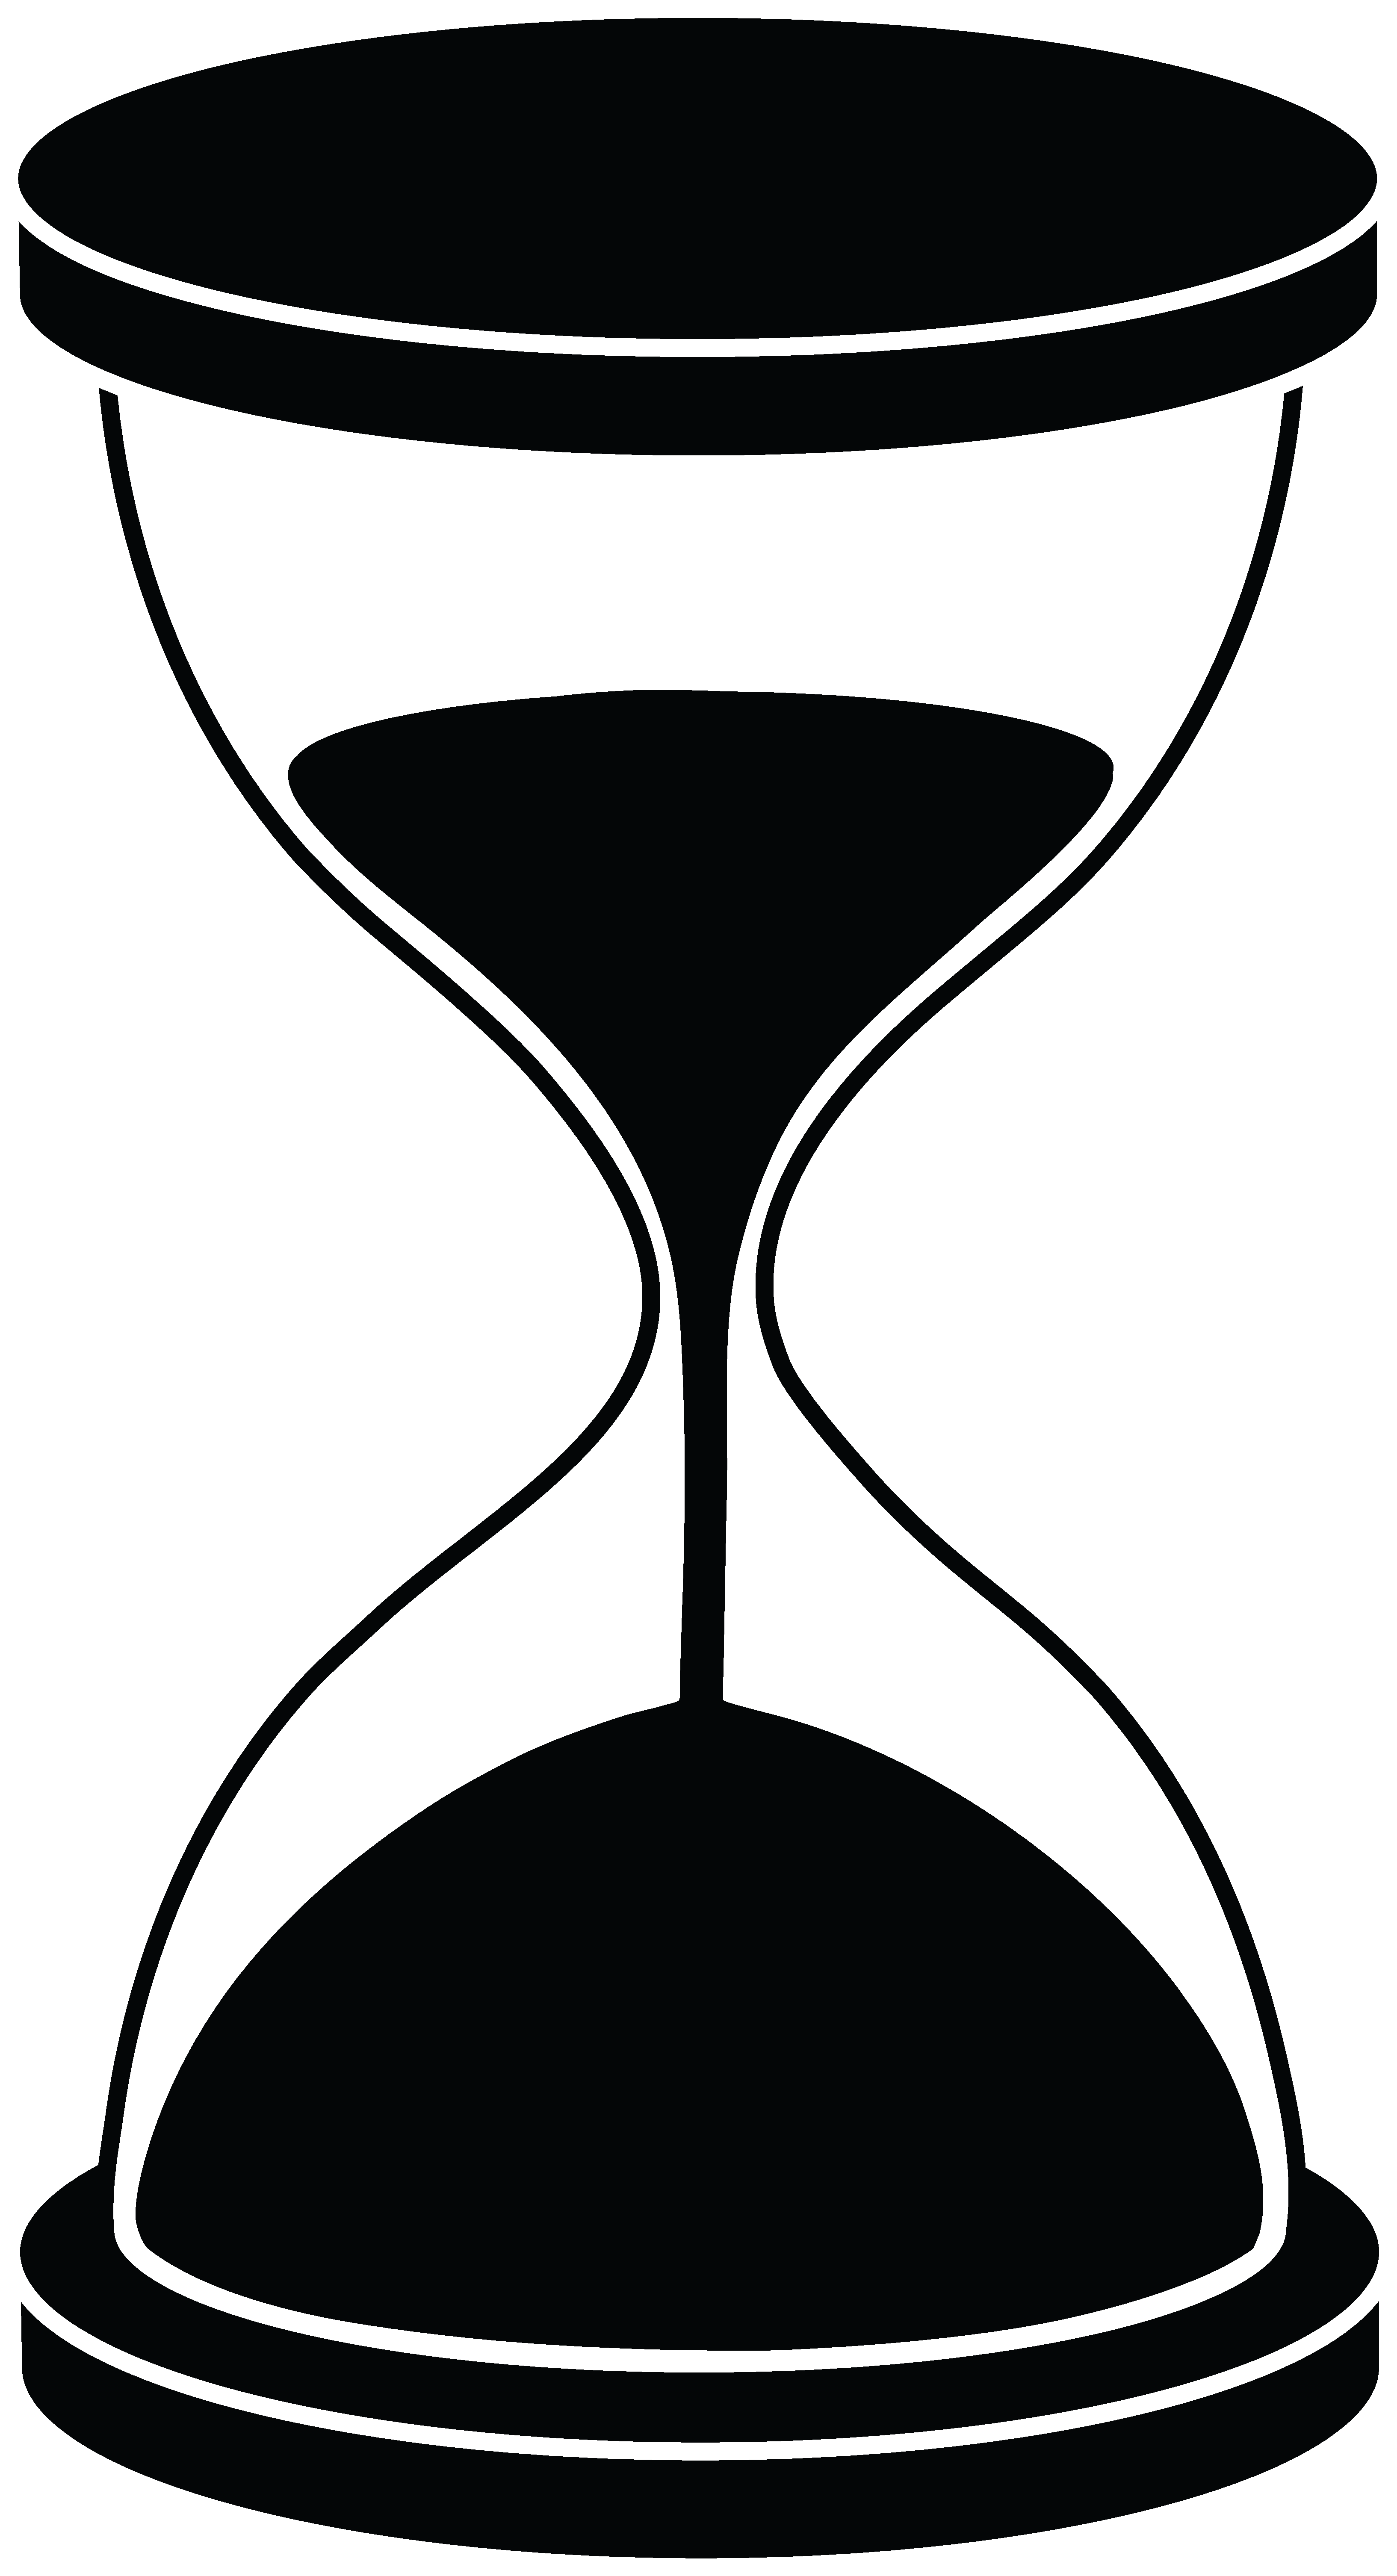 Amazing Hourglass Pictures & Backgrounds